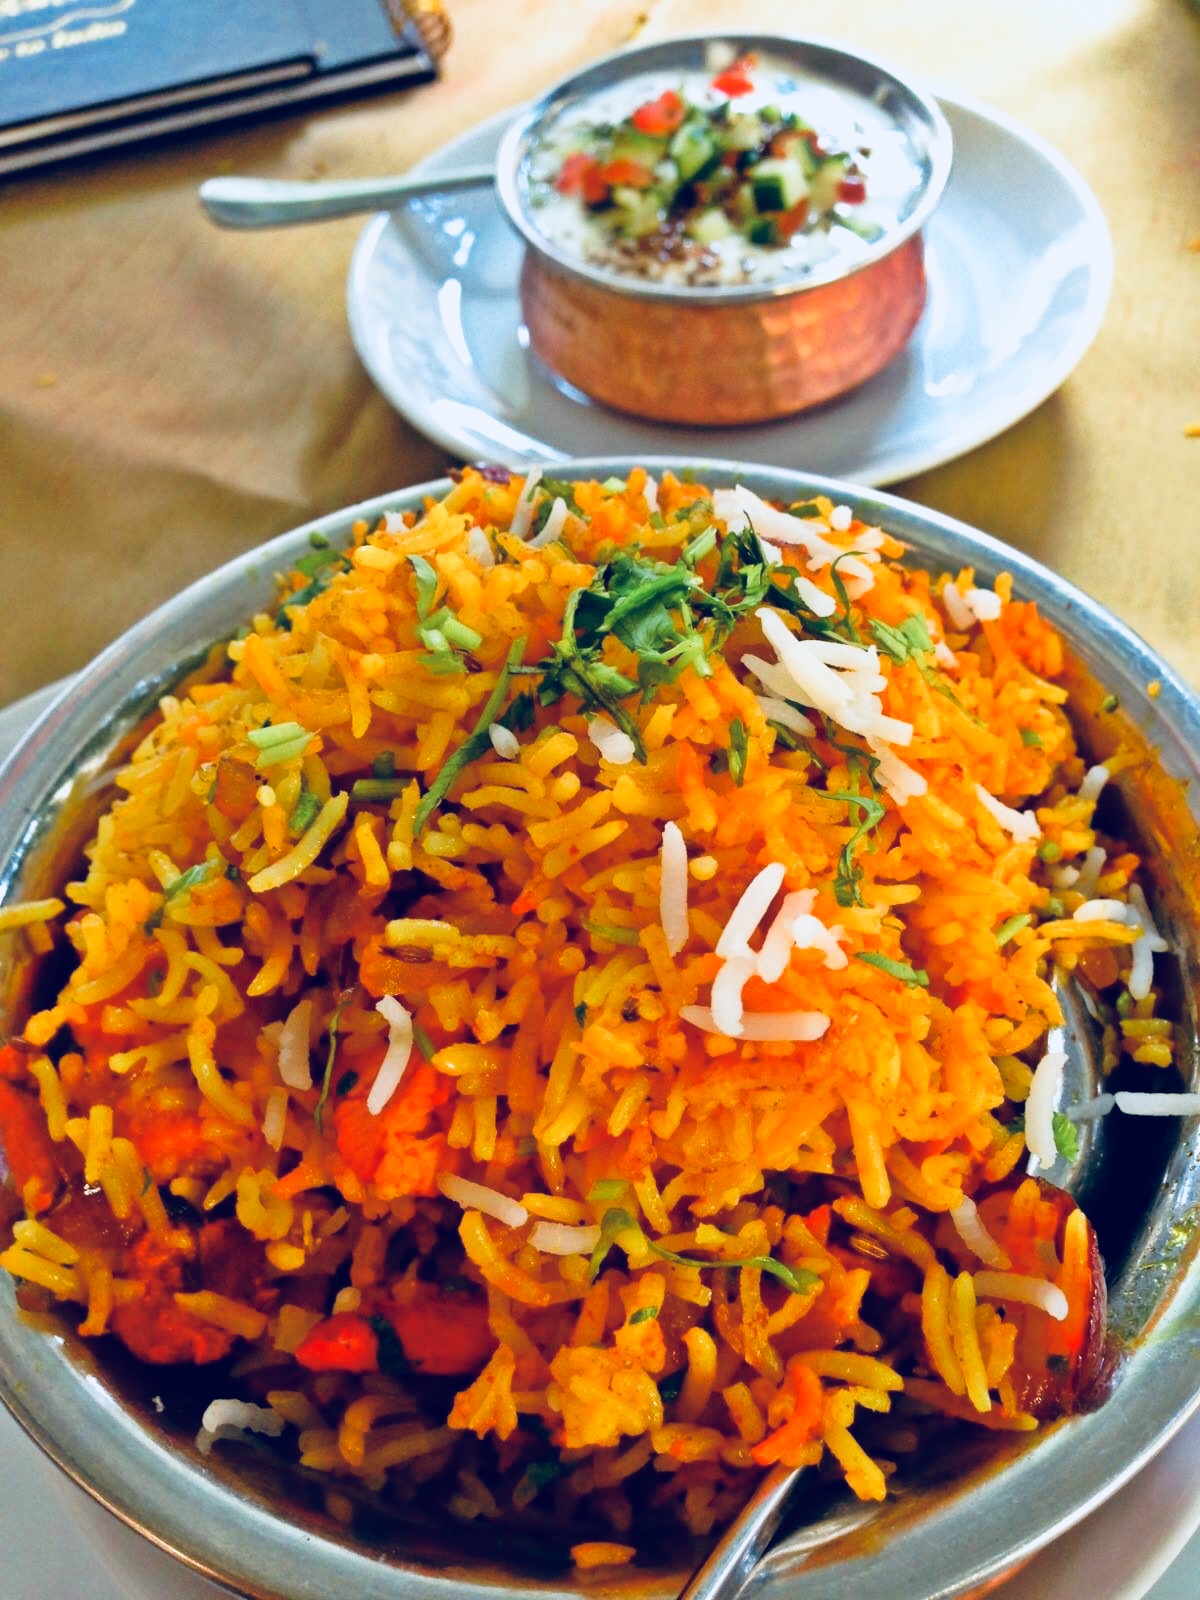 kebabs and curries co is very famous for it's chicken biryani. Here is a bowl of chicken biryani. 